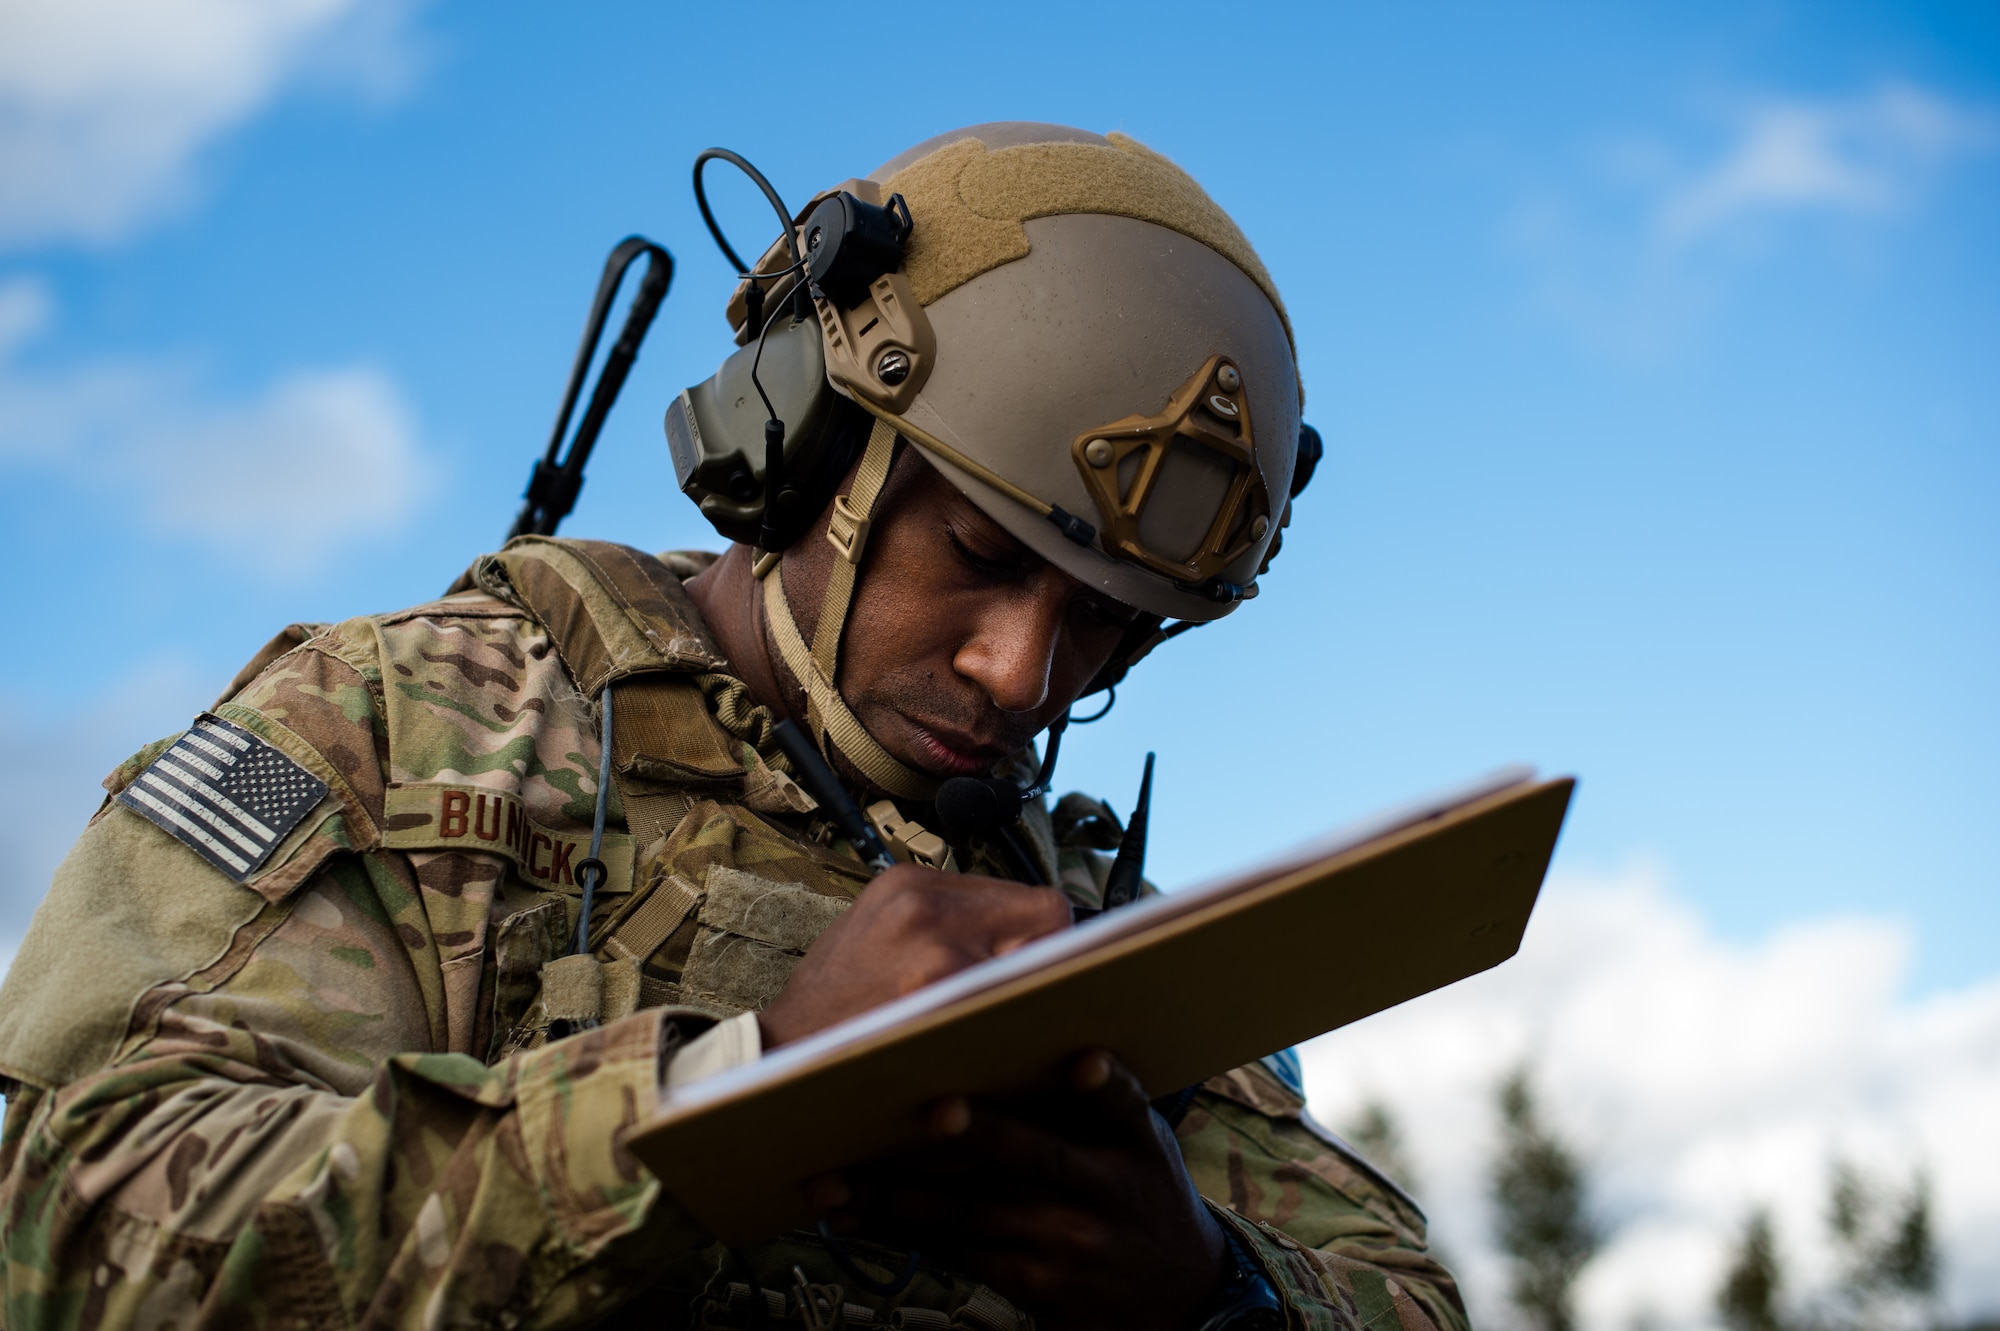 U.S. Air Force Staff Sgt. Therron Bundick, 2nd Air Support Operations Squadron joint terminal attack controller, evaluates two tactical air control party Airmen’s ability to provide close air support for the 503rd Infantry Regiment during exercise Rock Proof V Oct. 16, 2015, at Pocek Training Range, near Postojna, Slovenia. The exercise provided both U.S. Airmen and soldiers the opportunity to train, enhance and develop their skills under controlled live artillery fire, small arms fire and close air support. (U.S. Air Force photo/Staff Sgt. Armando A. Schwier-Morales)